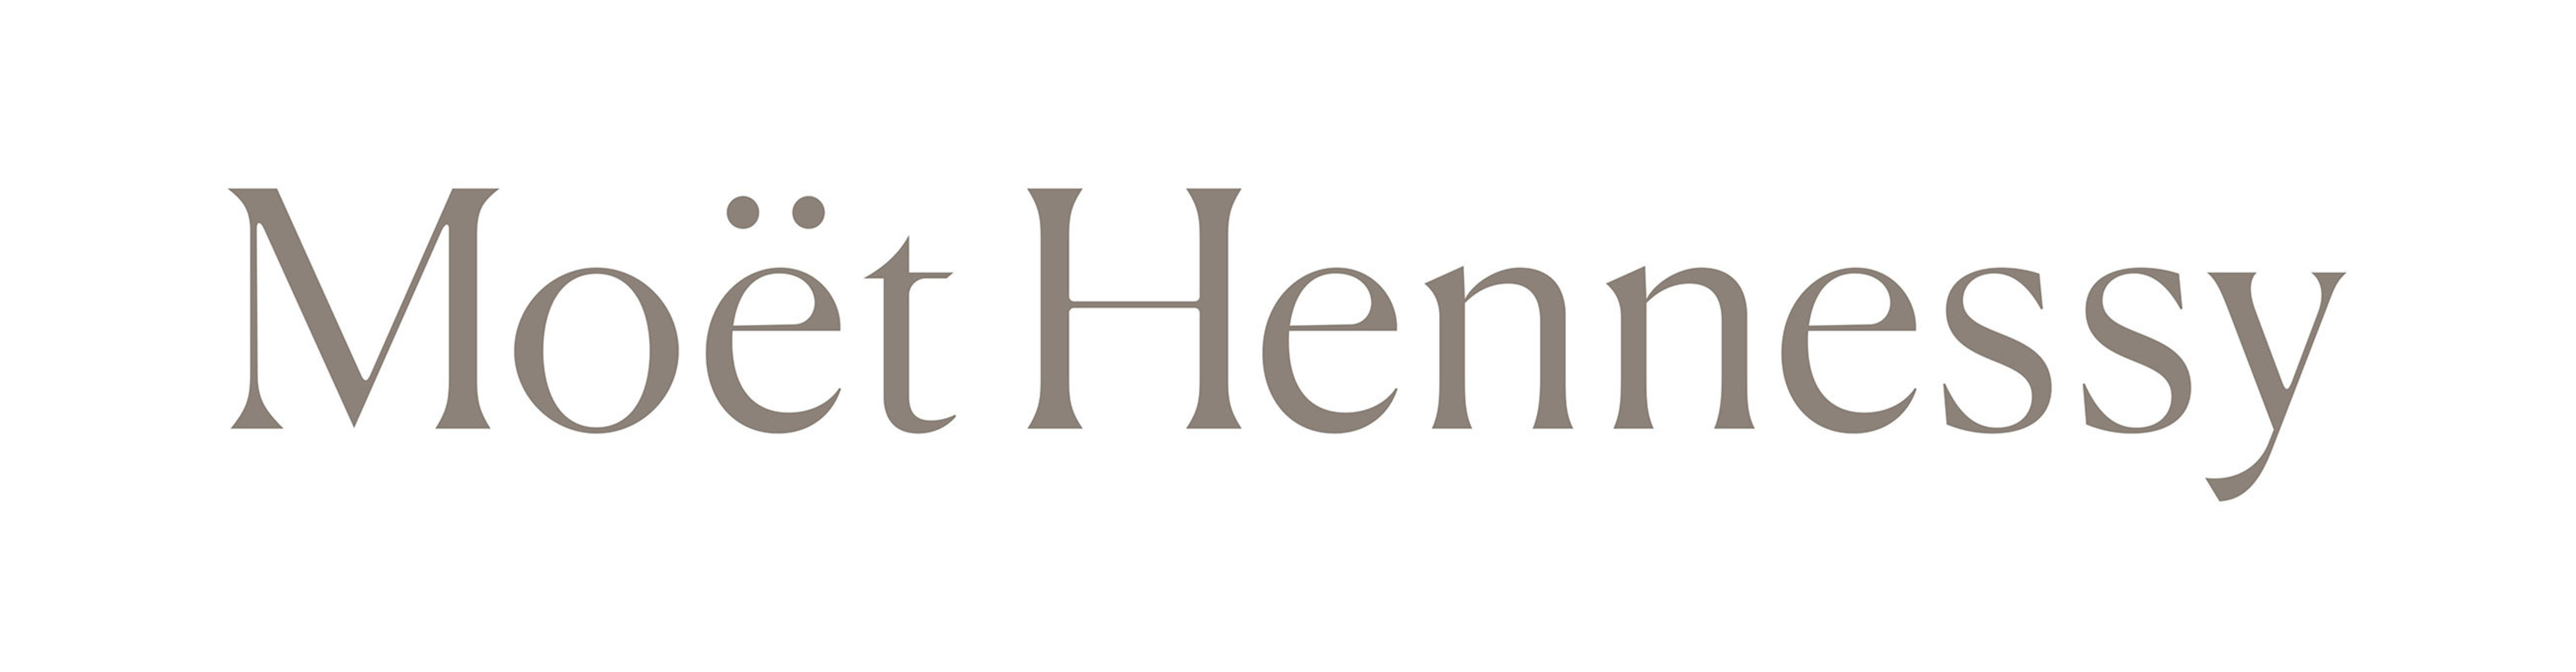 MOËT HENNESSY STRENGTHENS ITS GLOBAL PORTFOLIO OF EXCEPTIONAL